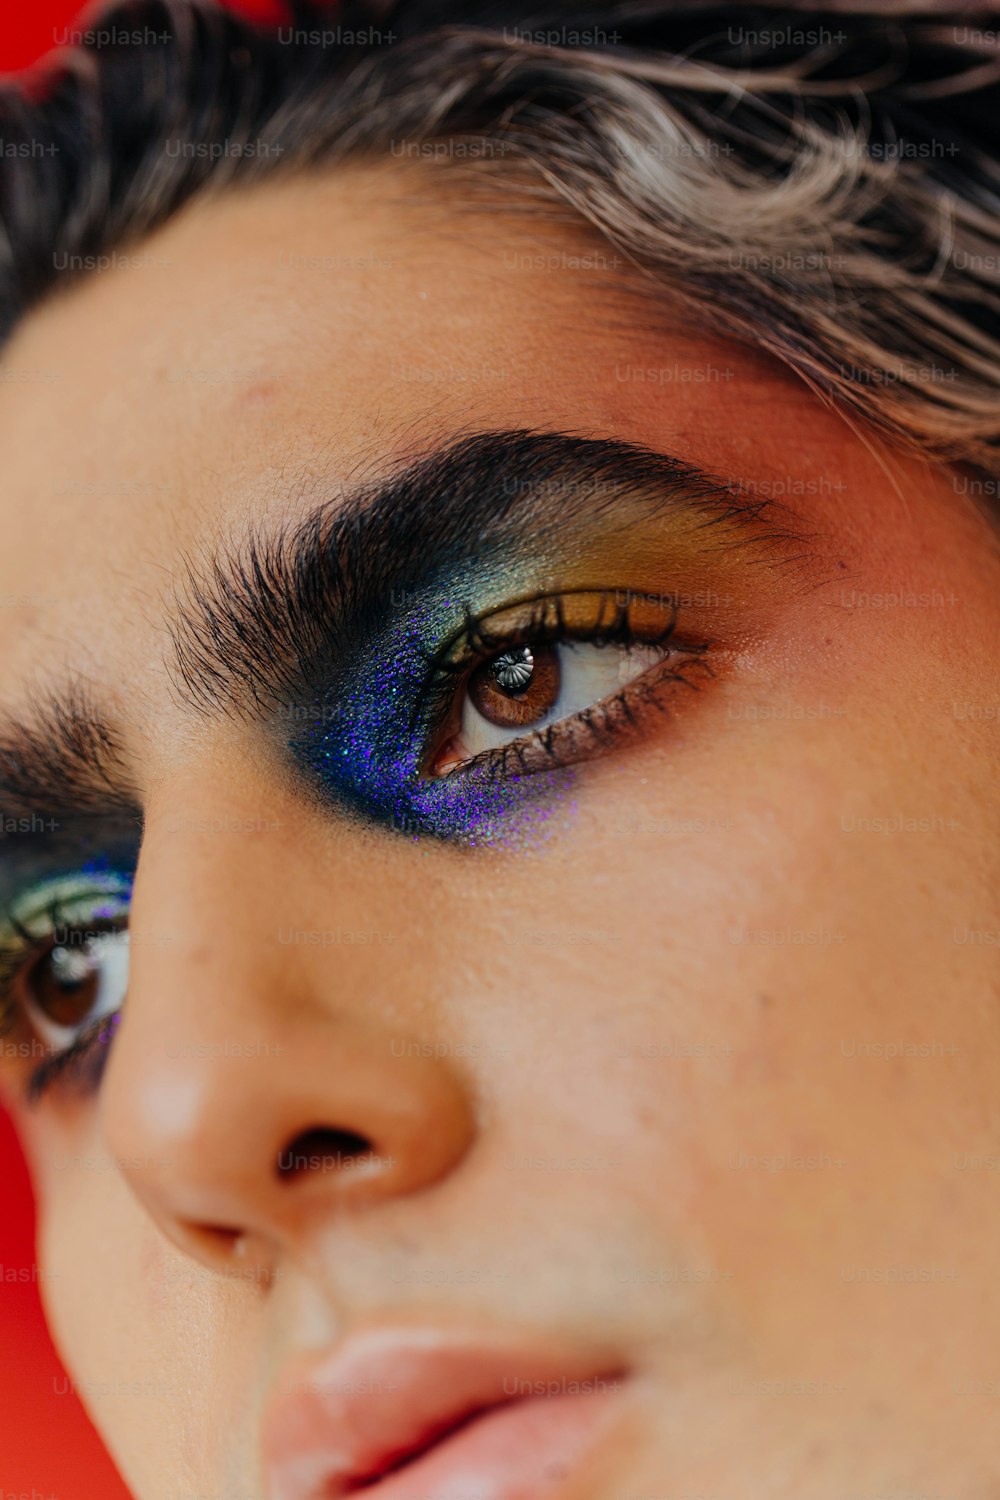 a close up of a person with blue and yellow eye makeup